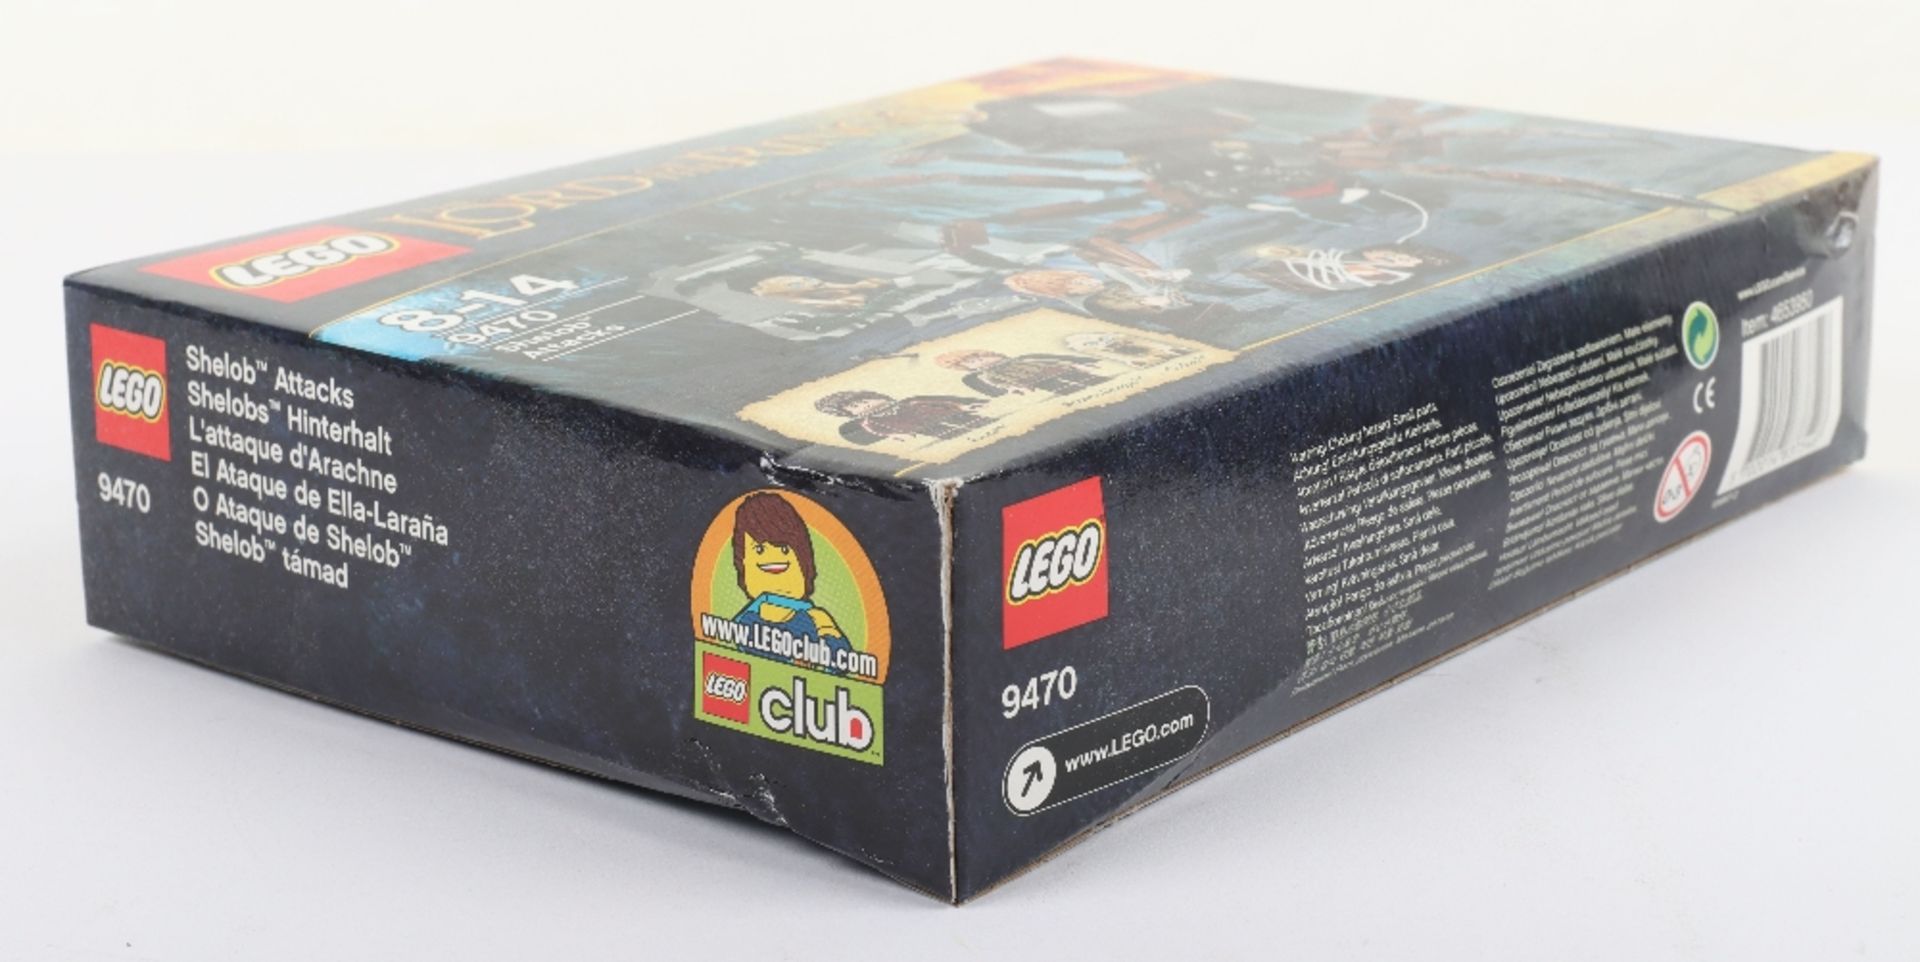 Lego Lord of the rings 9470 shelob attacks sealed boxed - Image 6 of 7